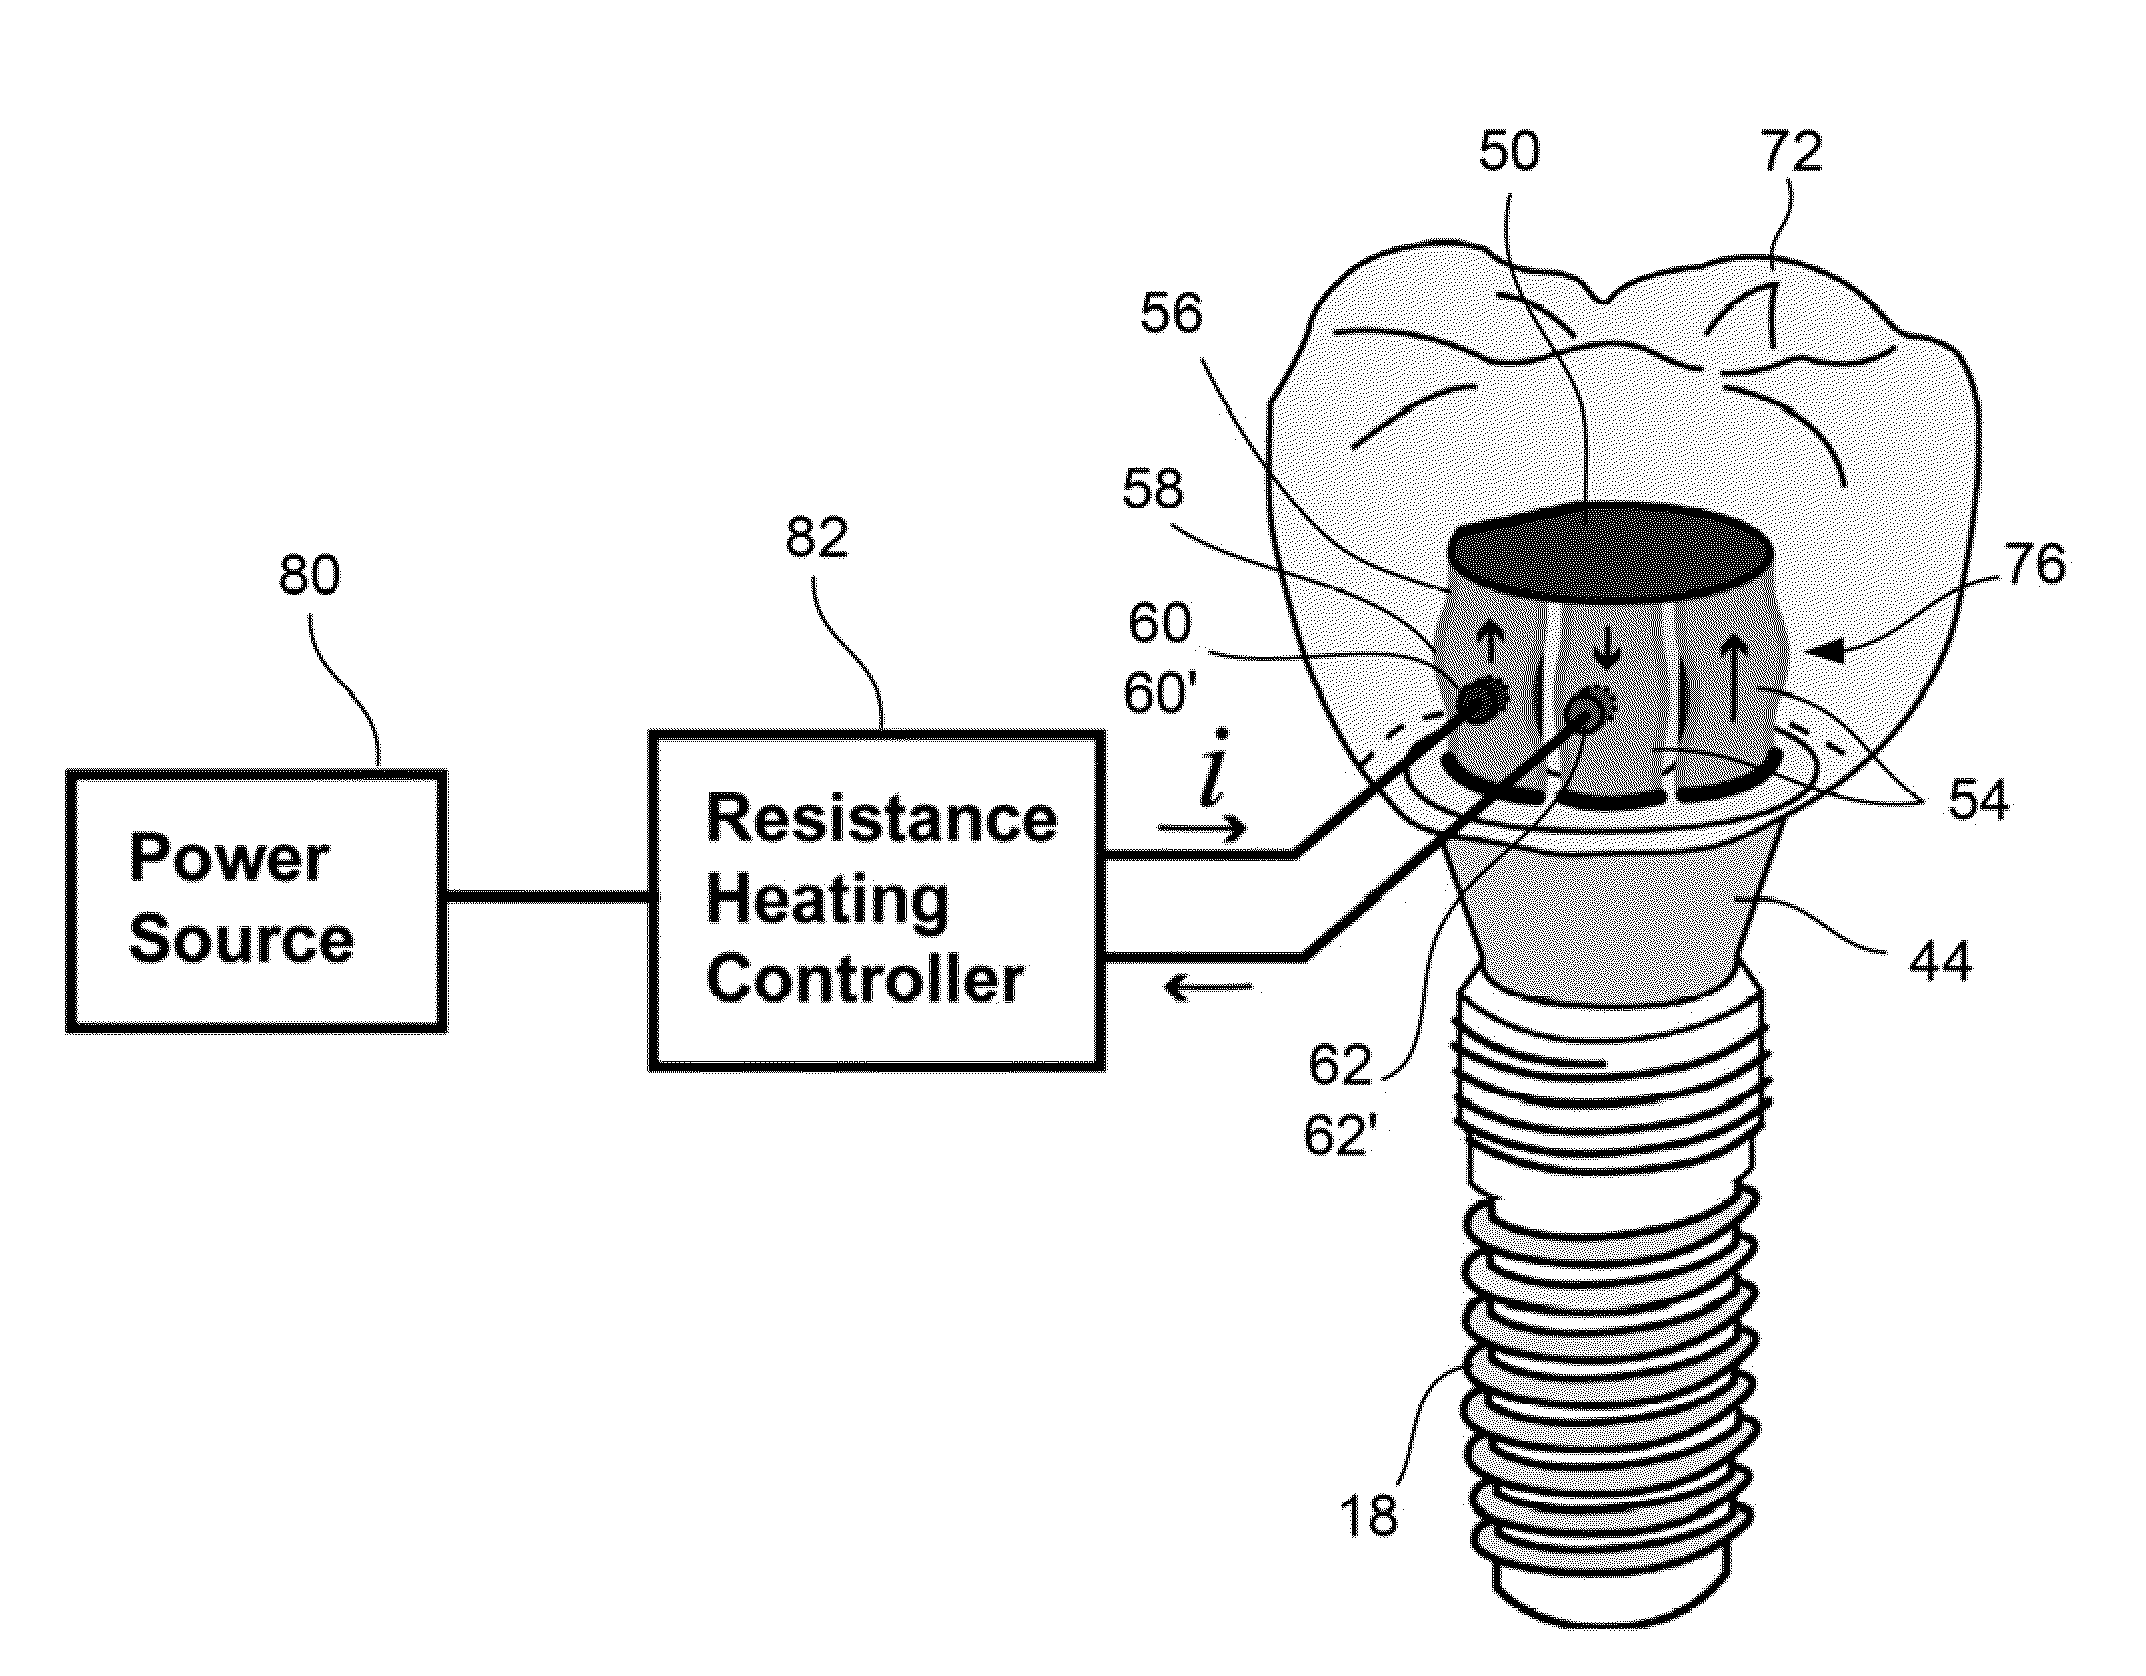 Oral appliance activation devices and methods